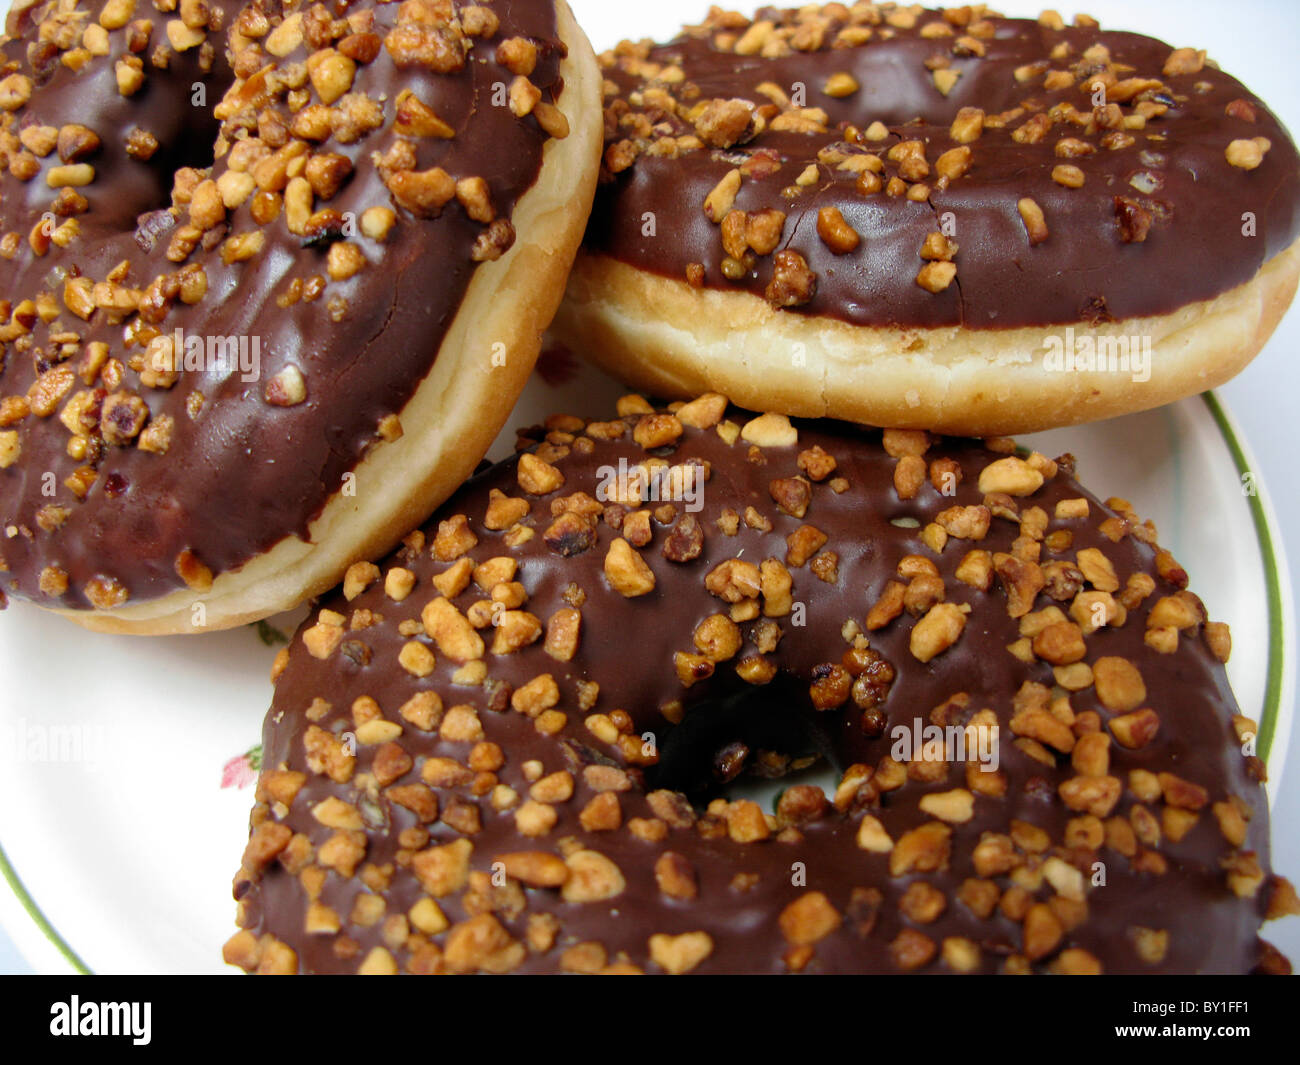 chocolate covered doughnuts on a plate Stock Photo